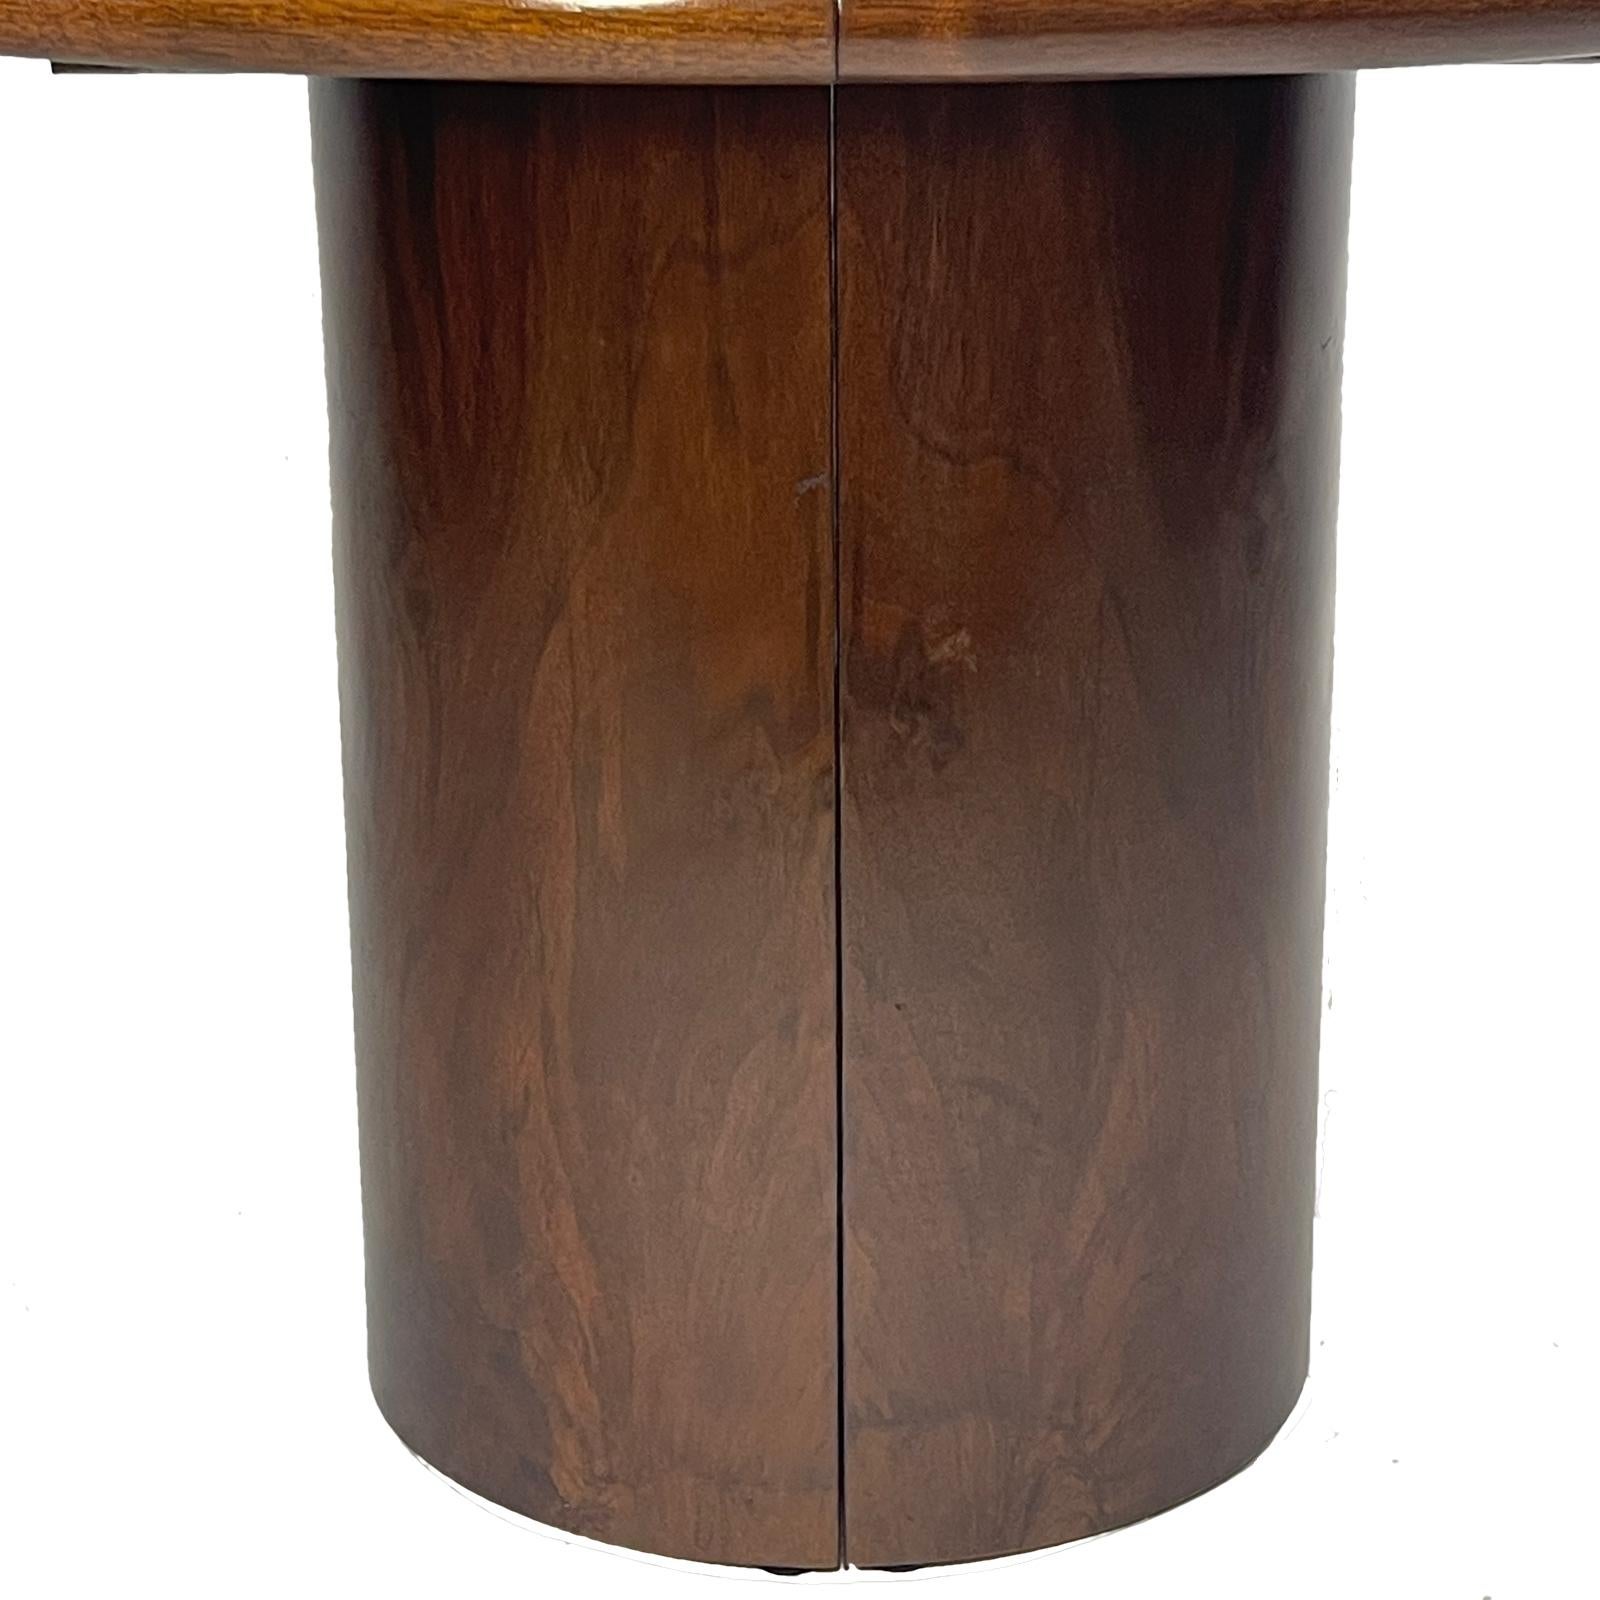 Oiled Paul Mayen Intrex  Habitat Burled Mahogany Round to Oval Extension Dining Table 